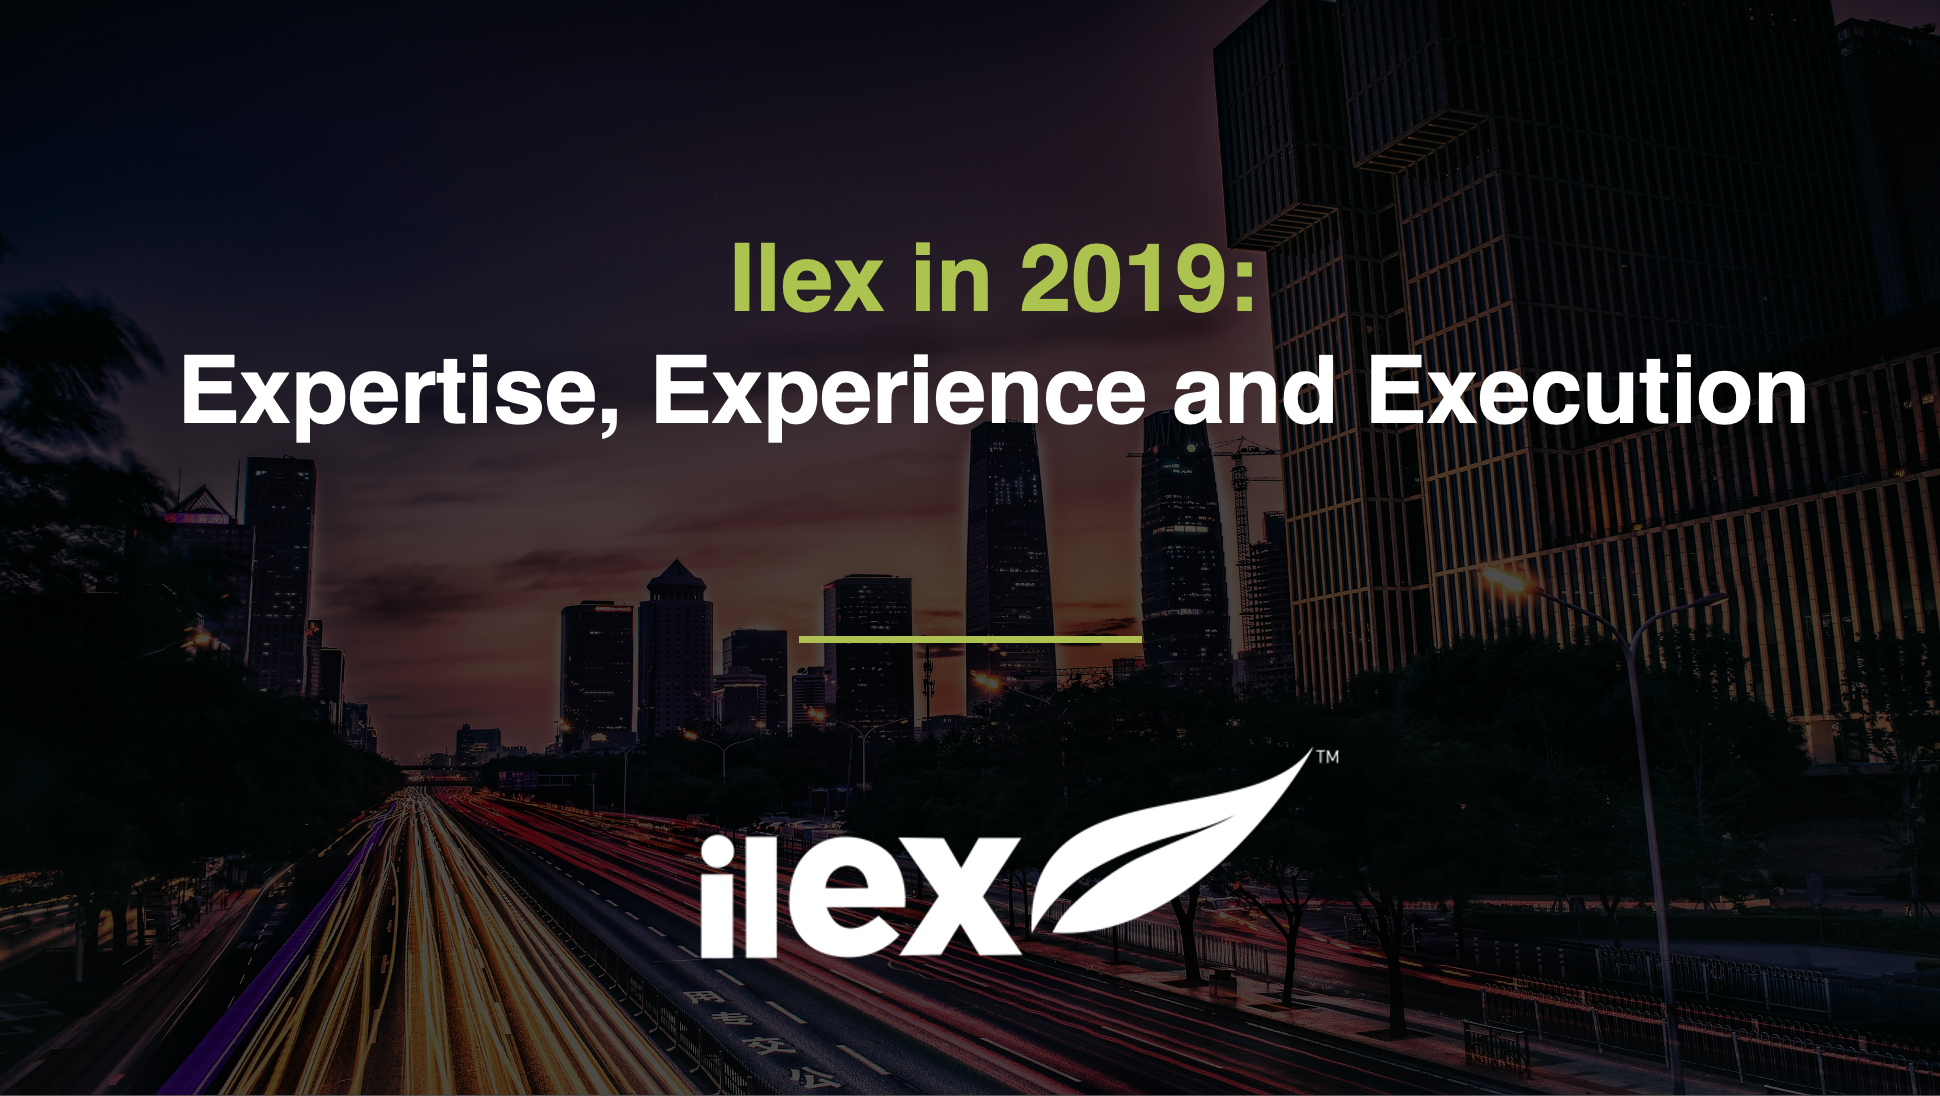 Ilex in 2019: Expertise, Experience and Execution